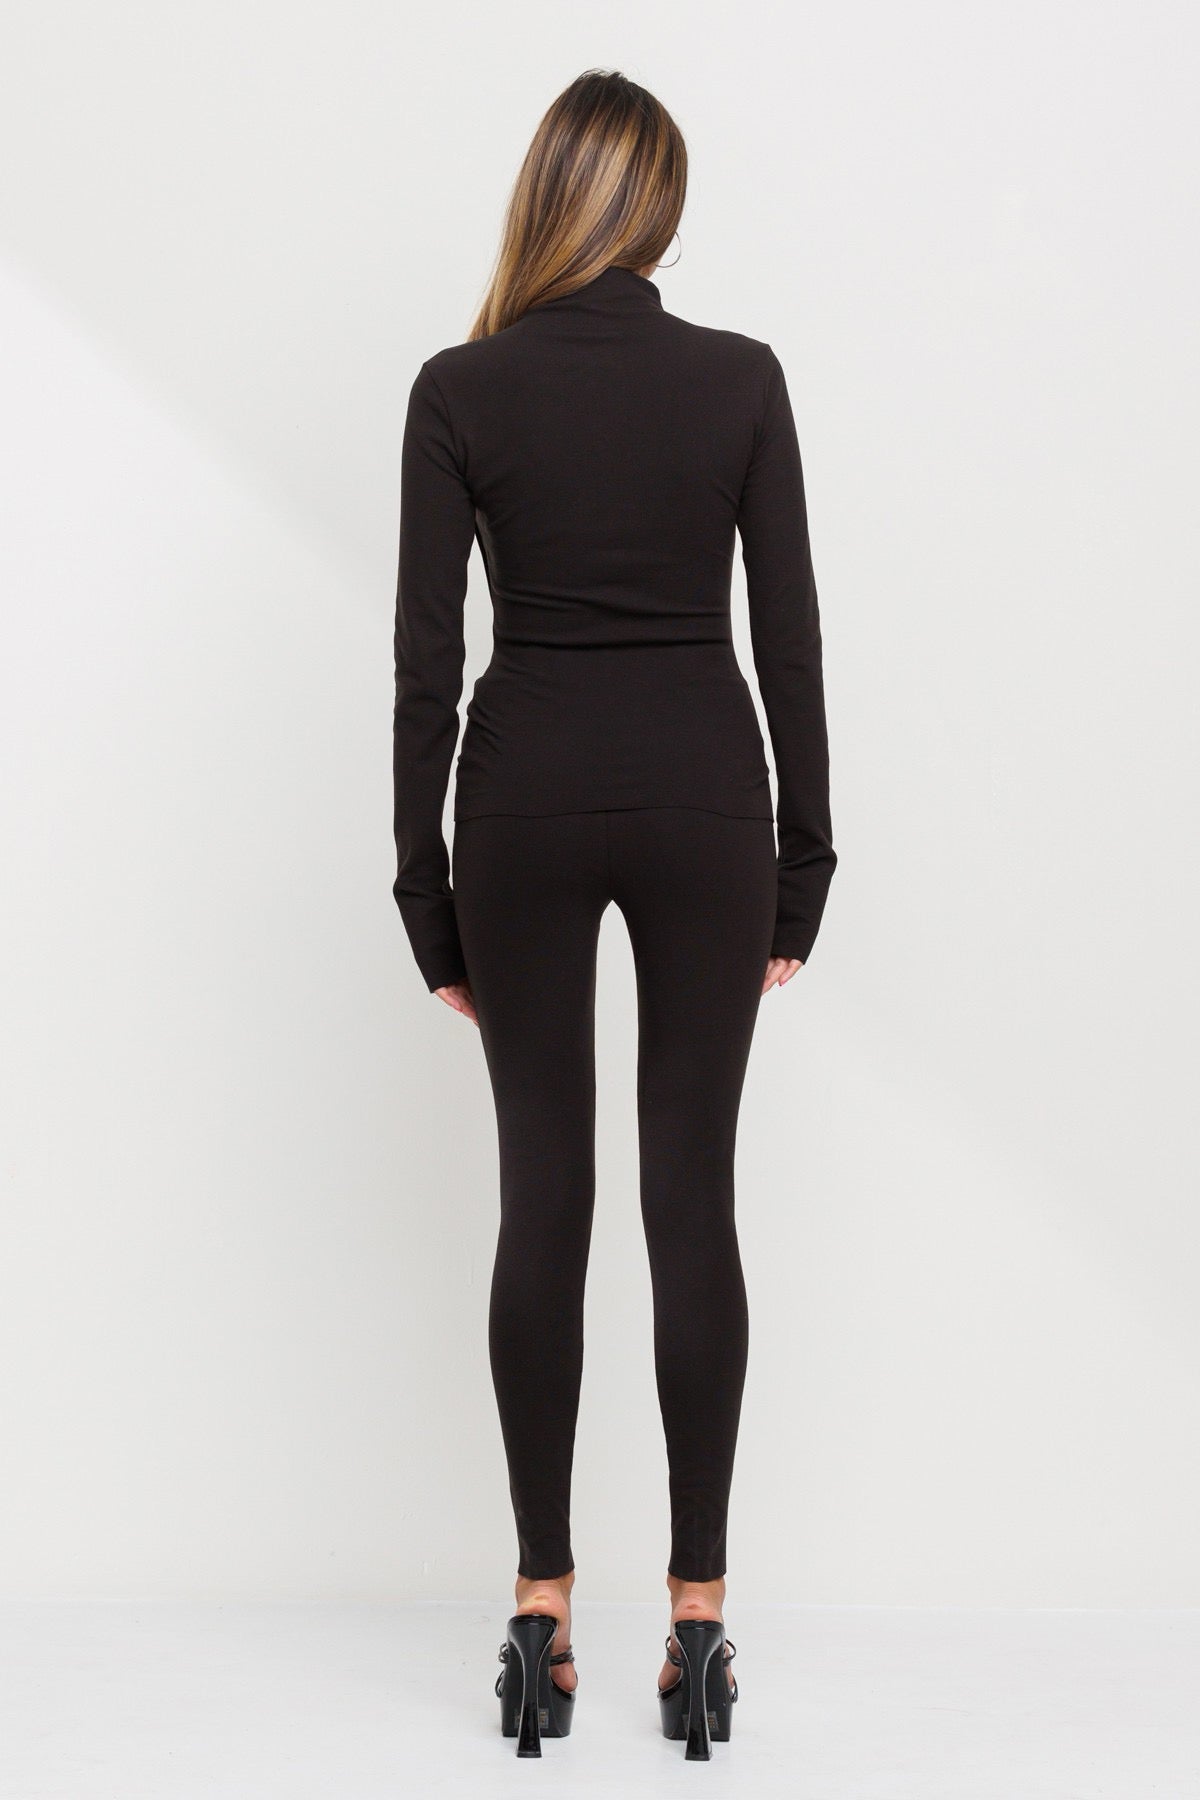 Ultra soft double side jersey top and leggings (bottoms only)